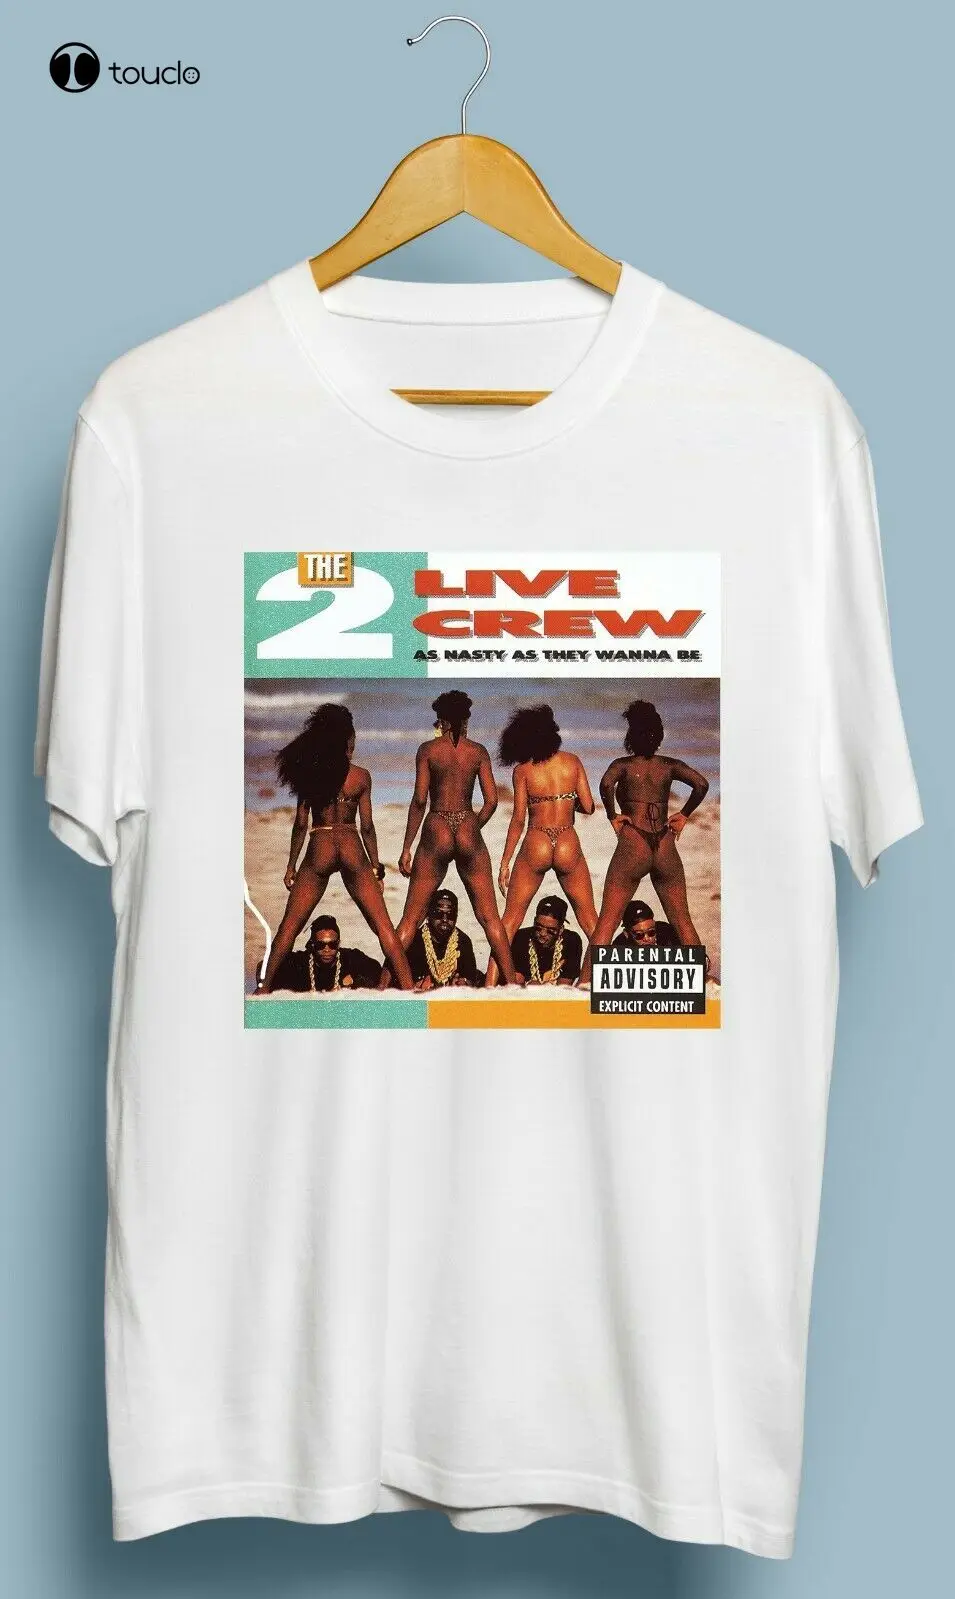 

Vintage 2 Live Crew - As Nasty As They T Shirt Size S M L Xl 5Xl Cotton Tee Shirt Unisex